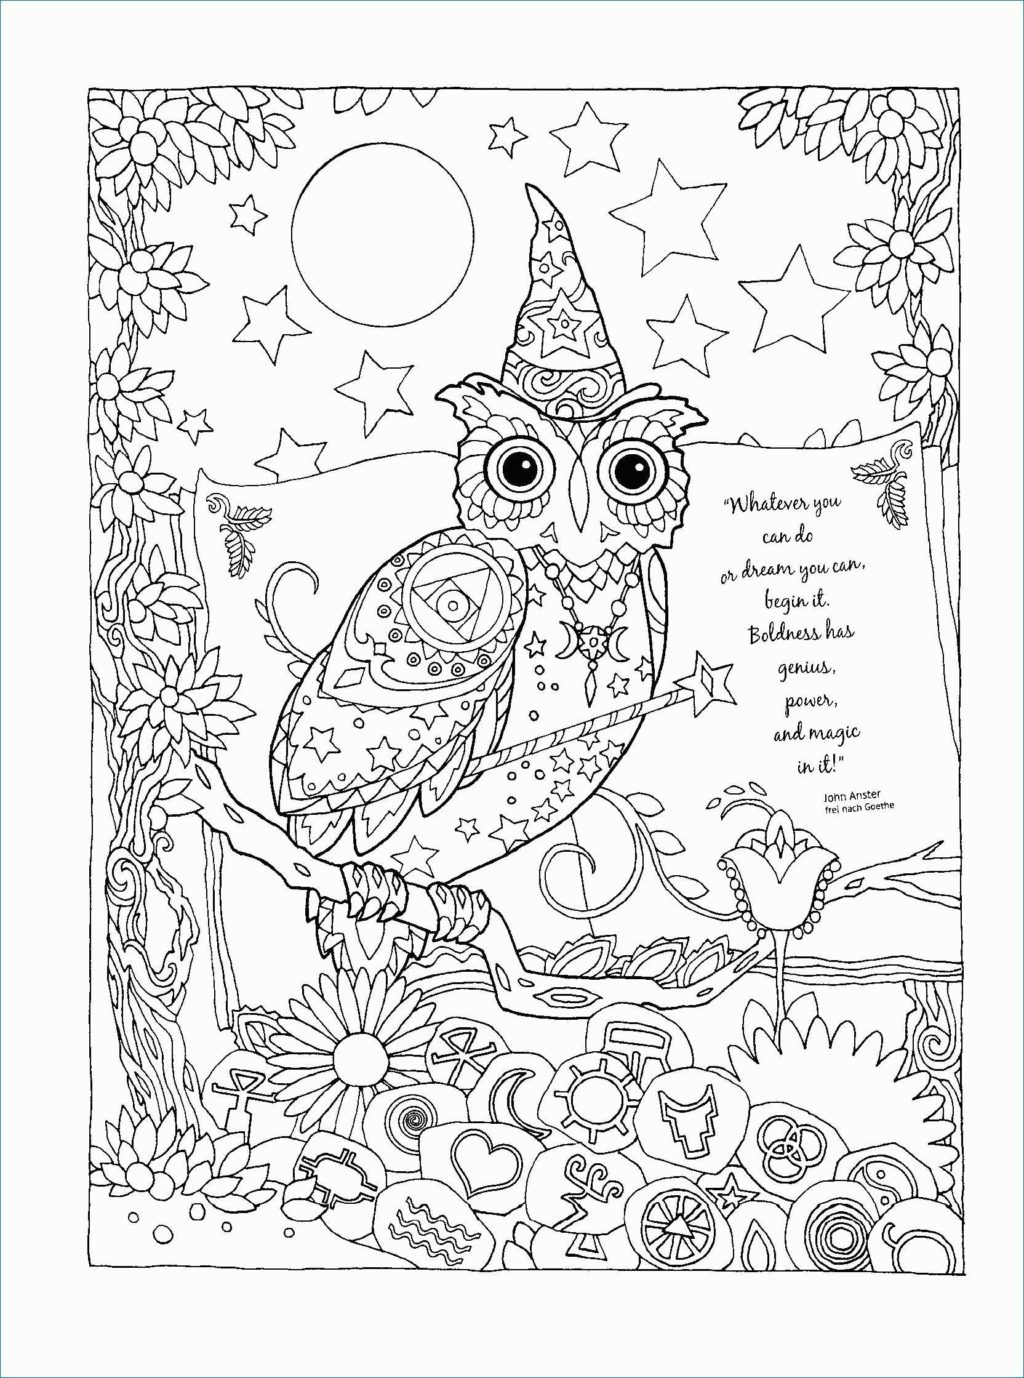 Coloring Pages For Elementary Students Coloring Book World Sight Word Coloringages Free Christmas